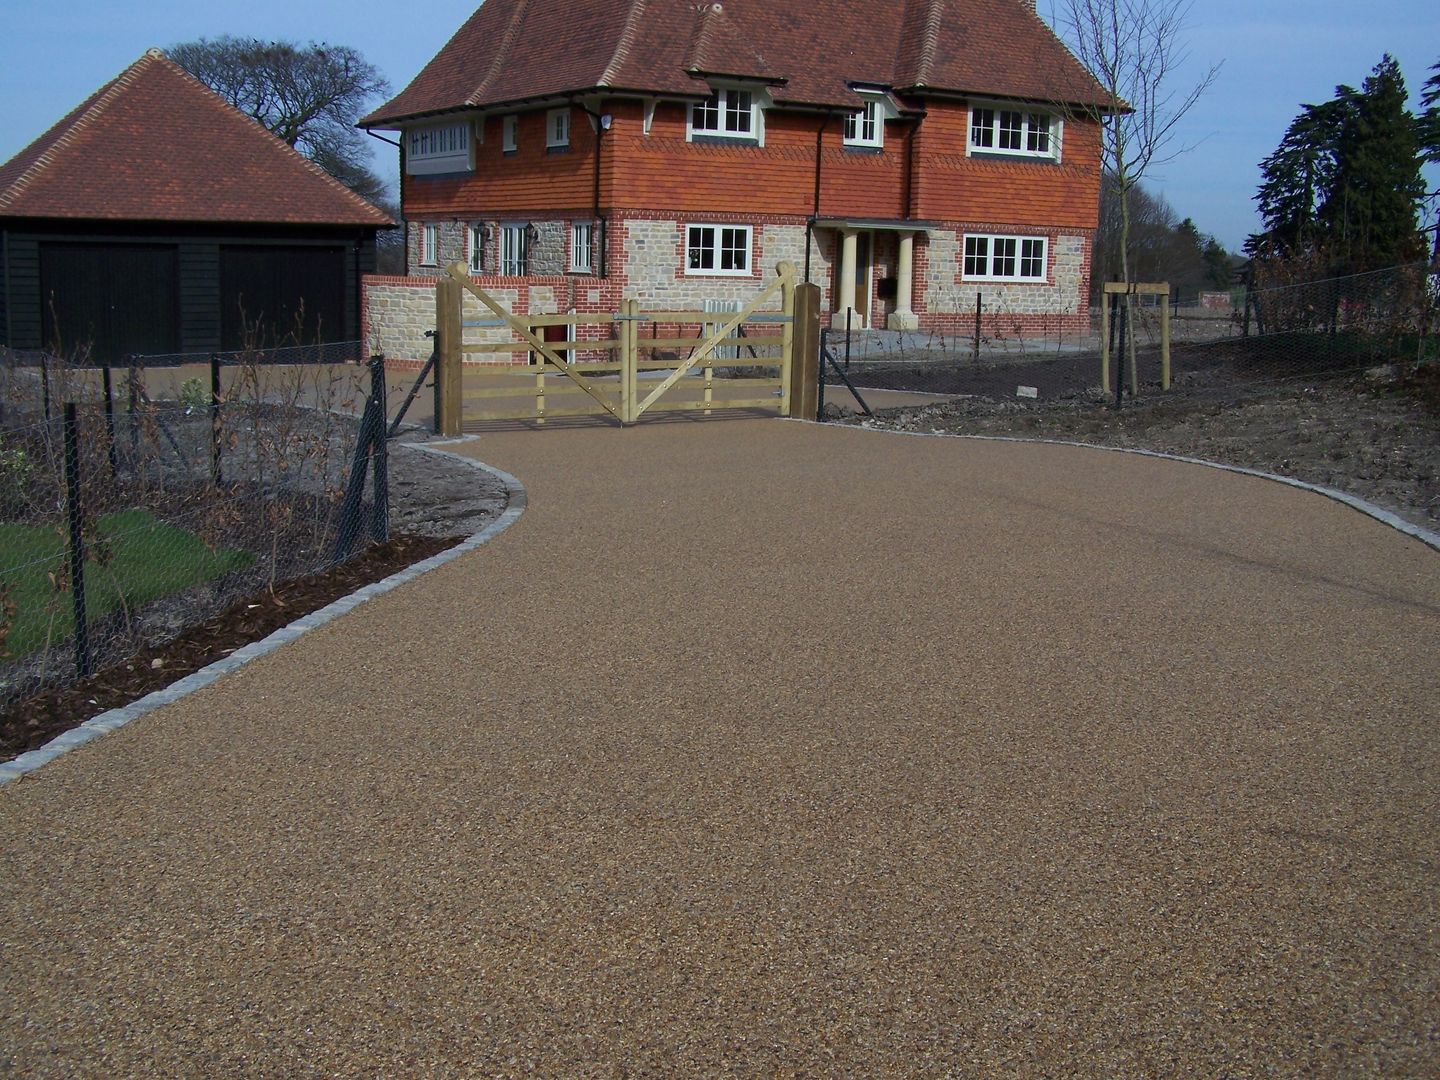 Domestic Driveways installation of resin bound paving, Permeable Paving Solutions UK Permeable Paving Solutions UK Paredes e pisos rústicos